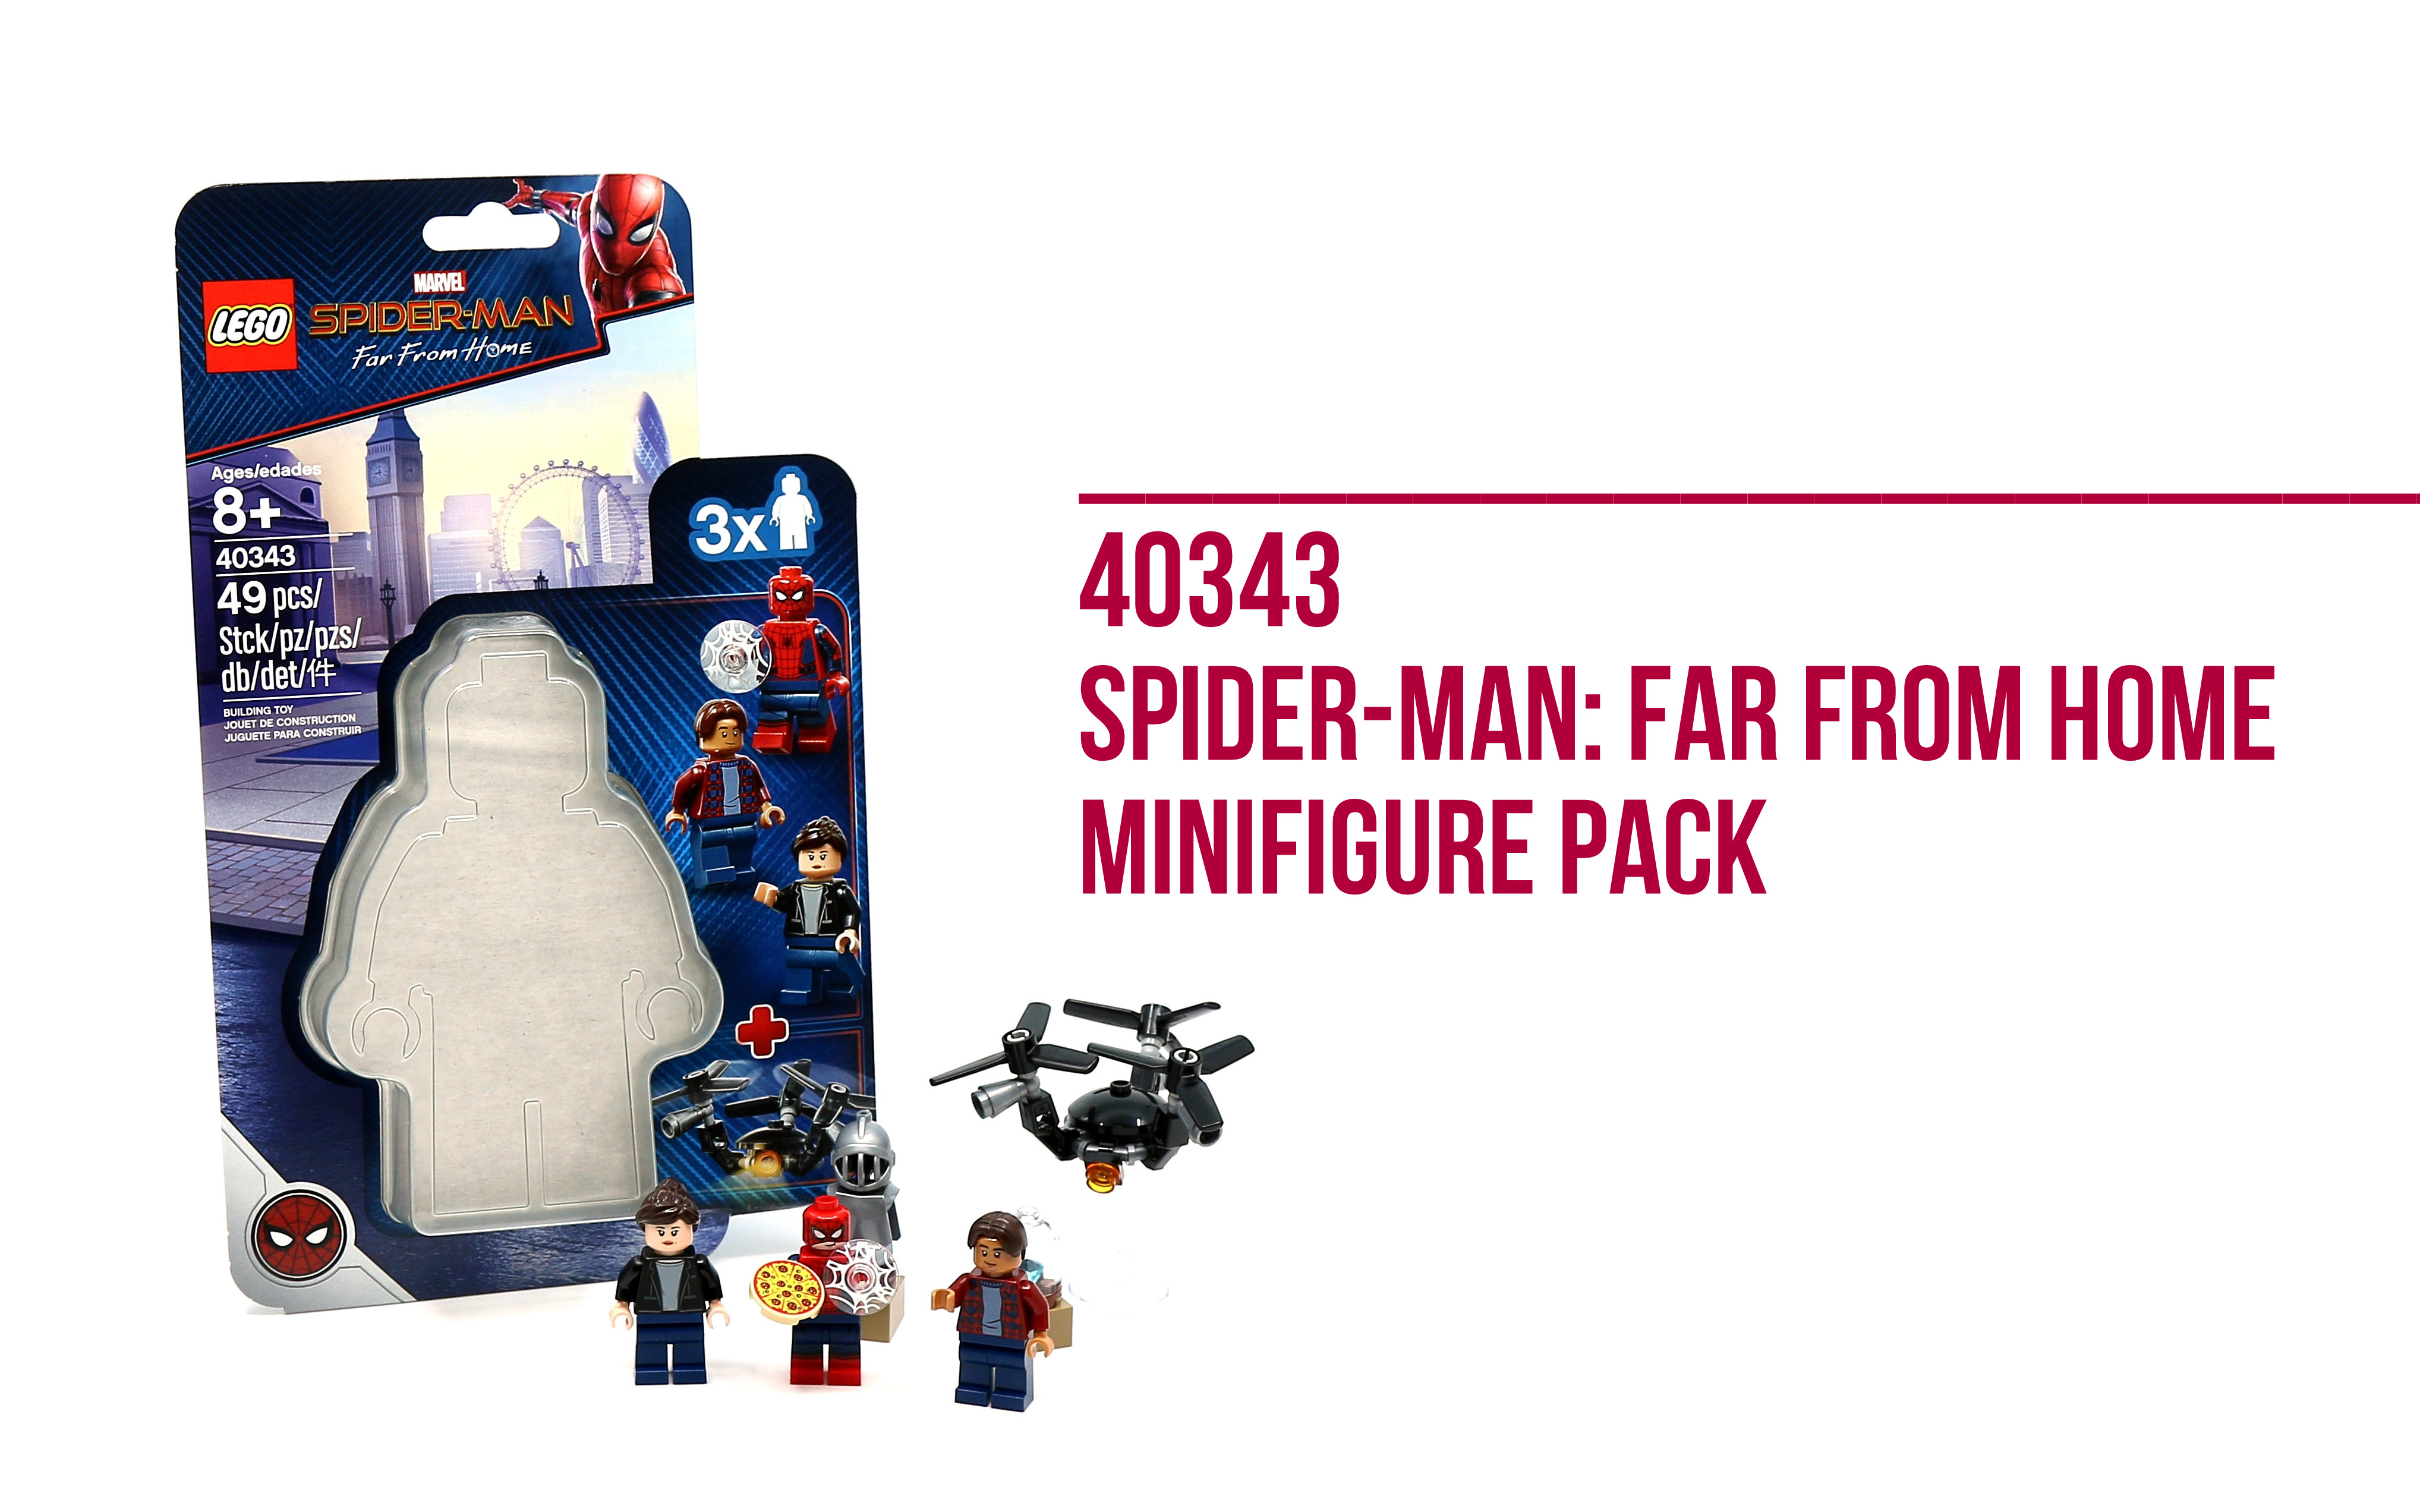 lego marvel spider man far from home